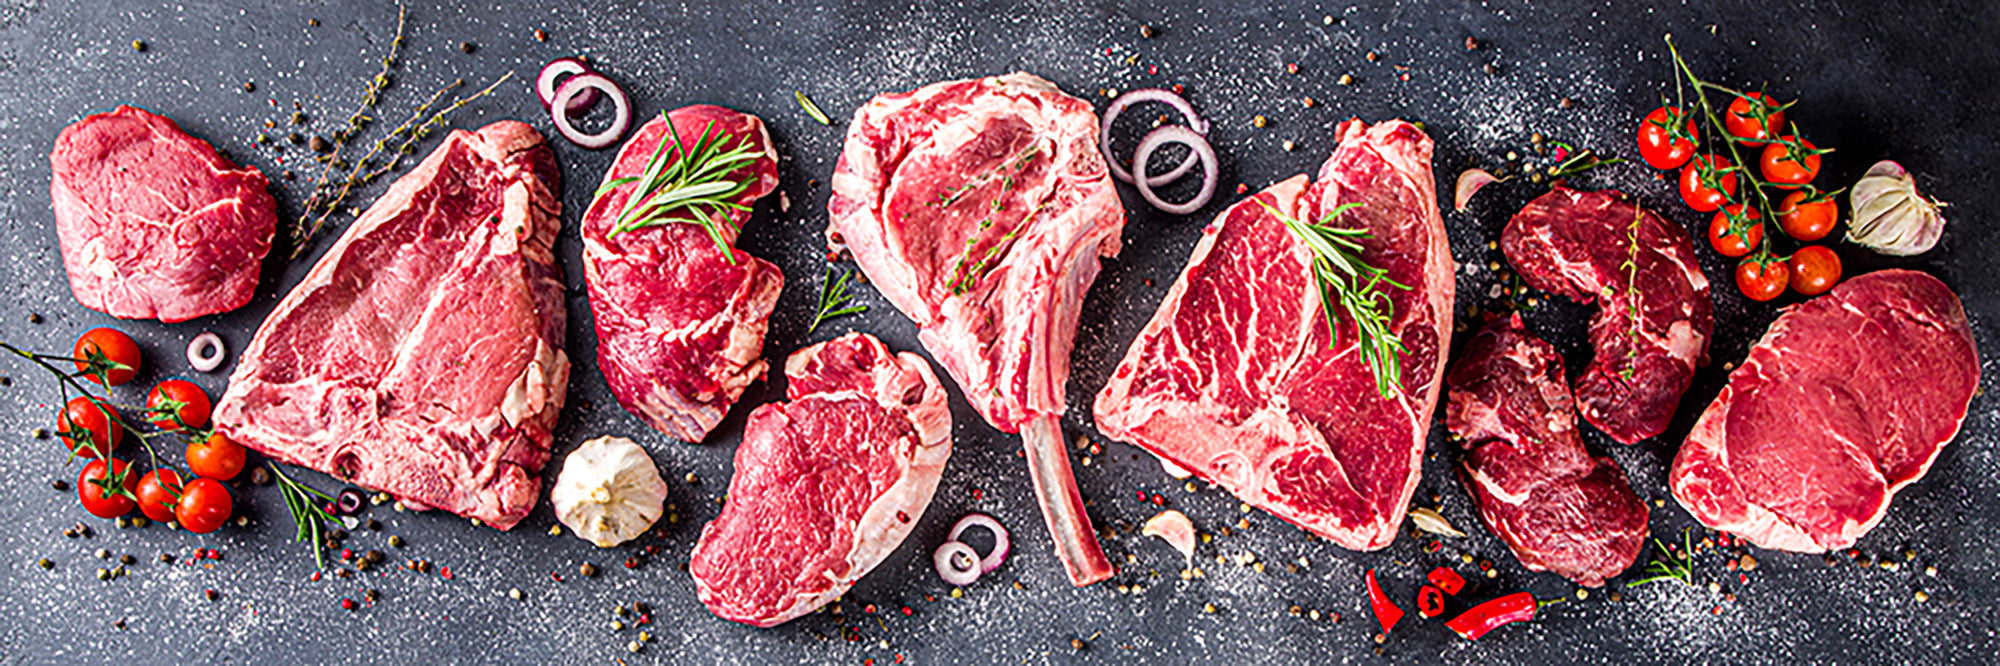 Discover Tailored Meat Box Delivery: Custom Cuts for Every Occasion